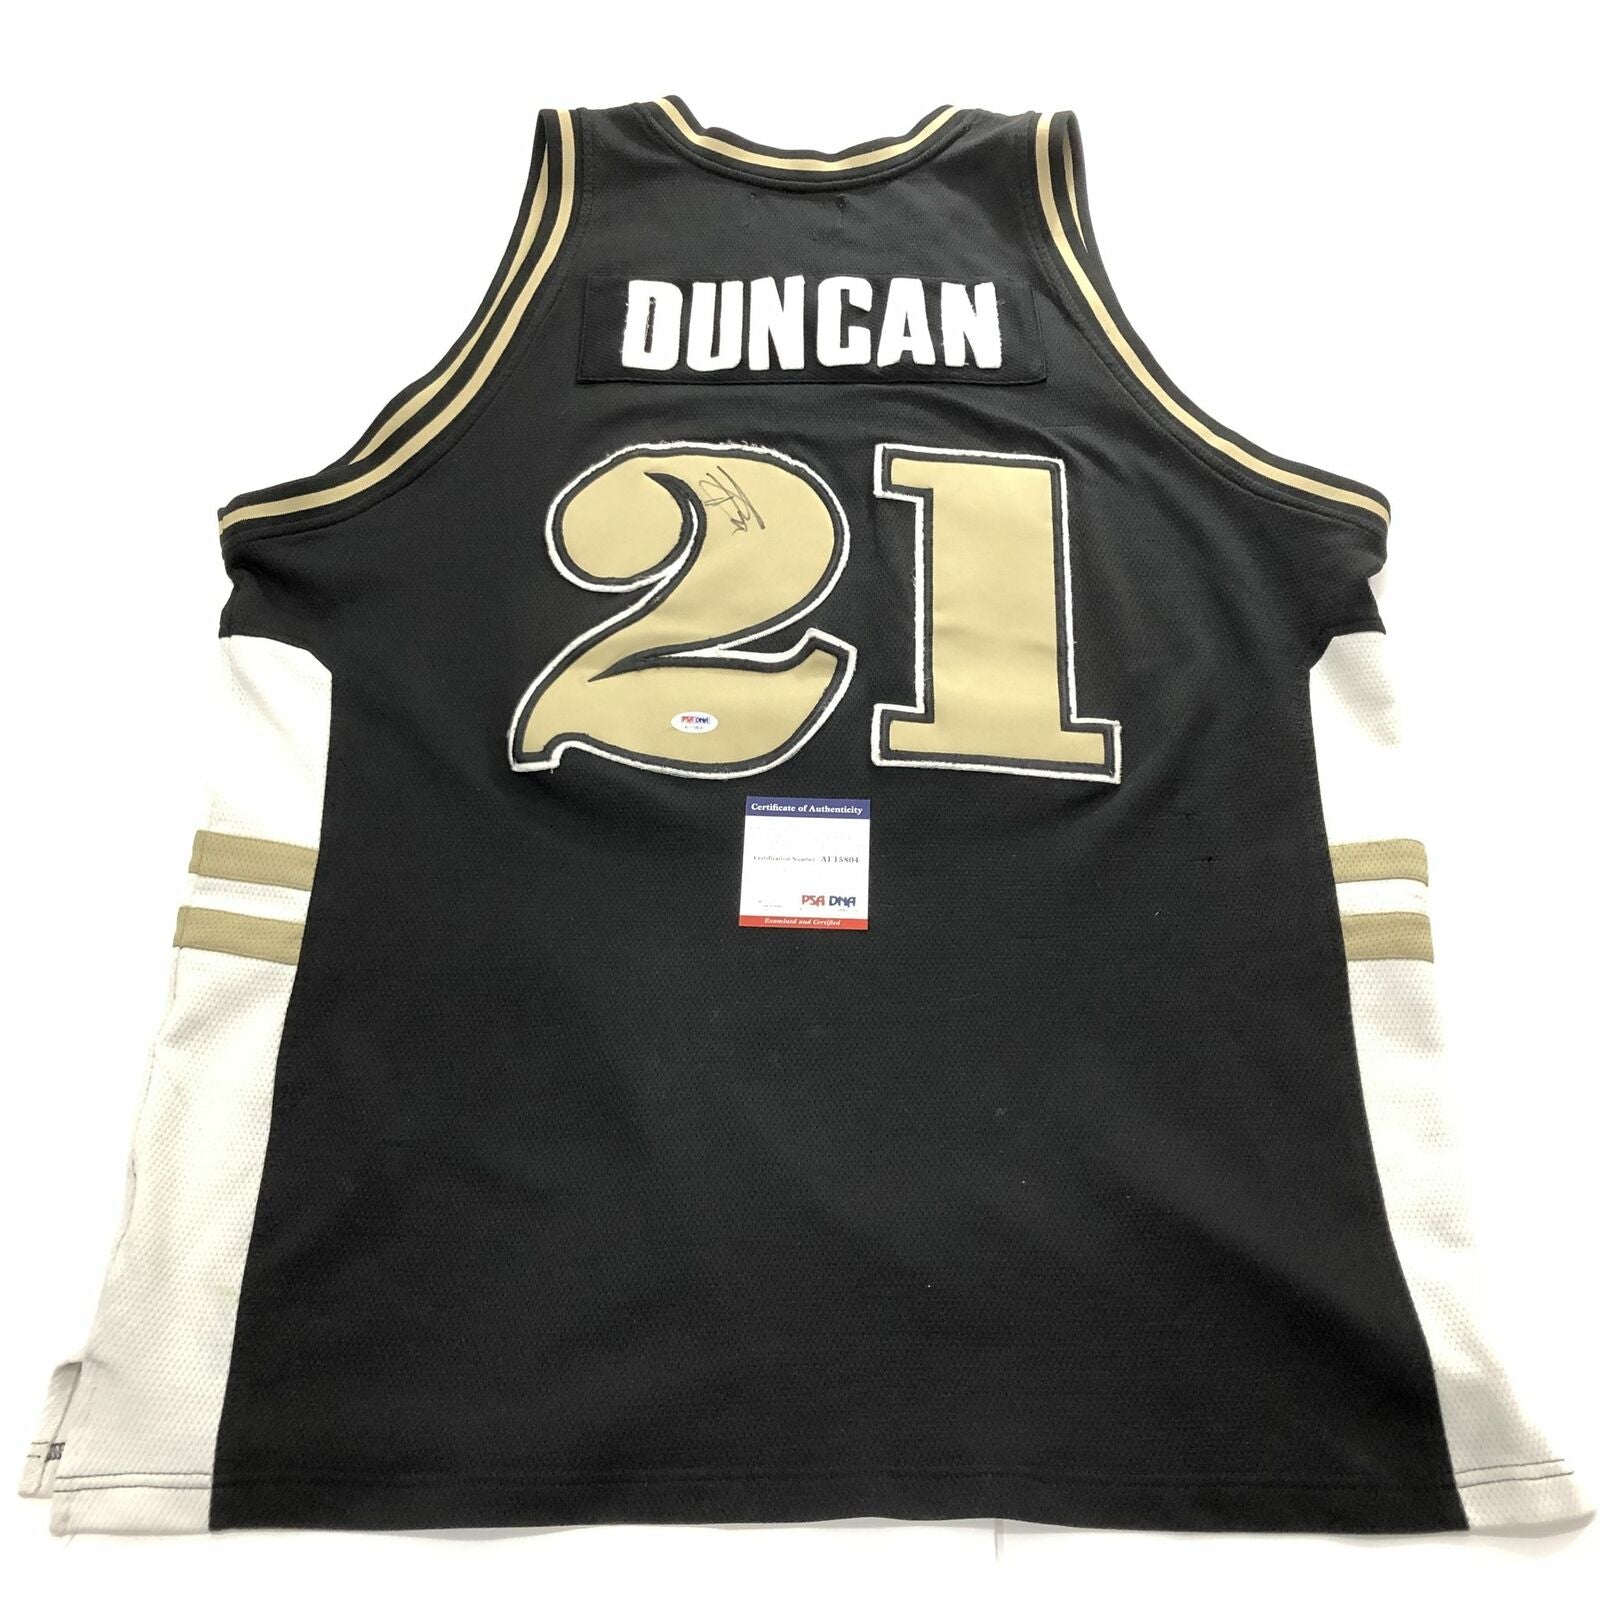 duncan signed jersey